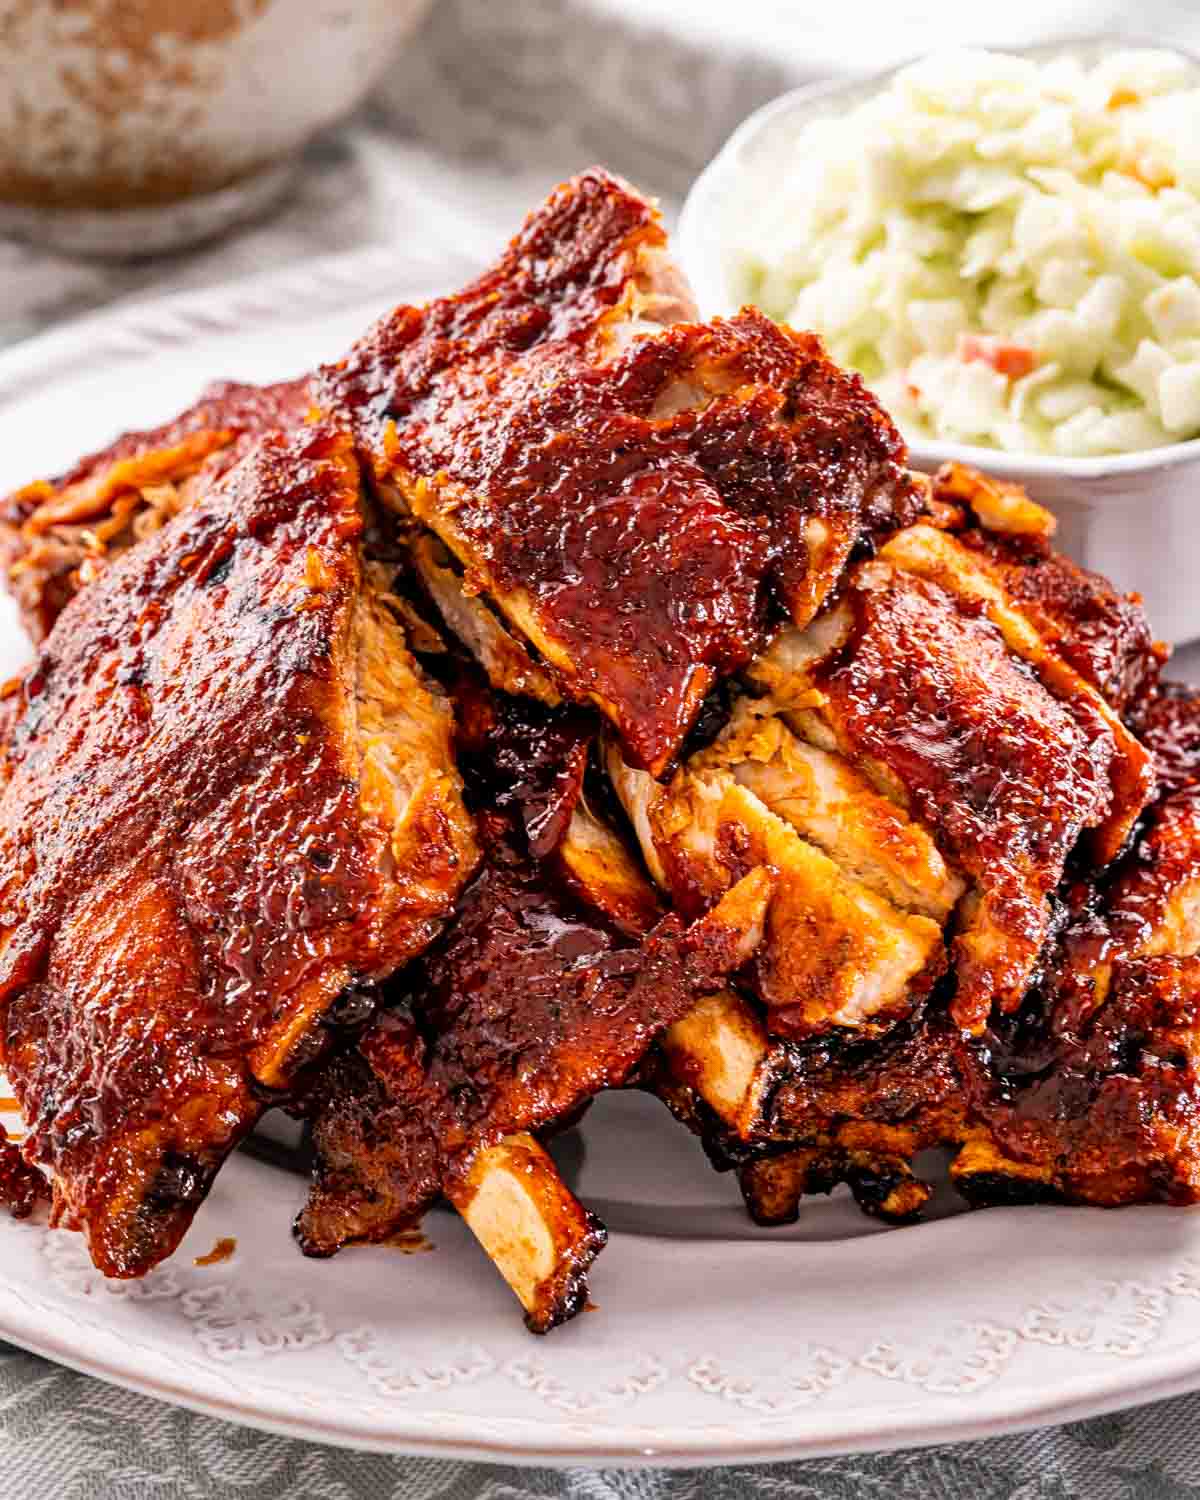 bbq ribs on a plate with coleslaw.